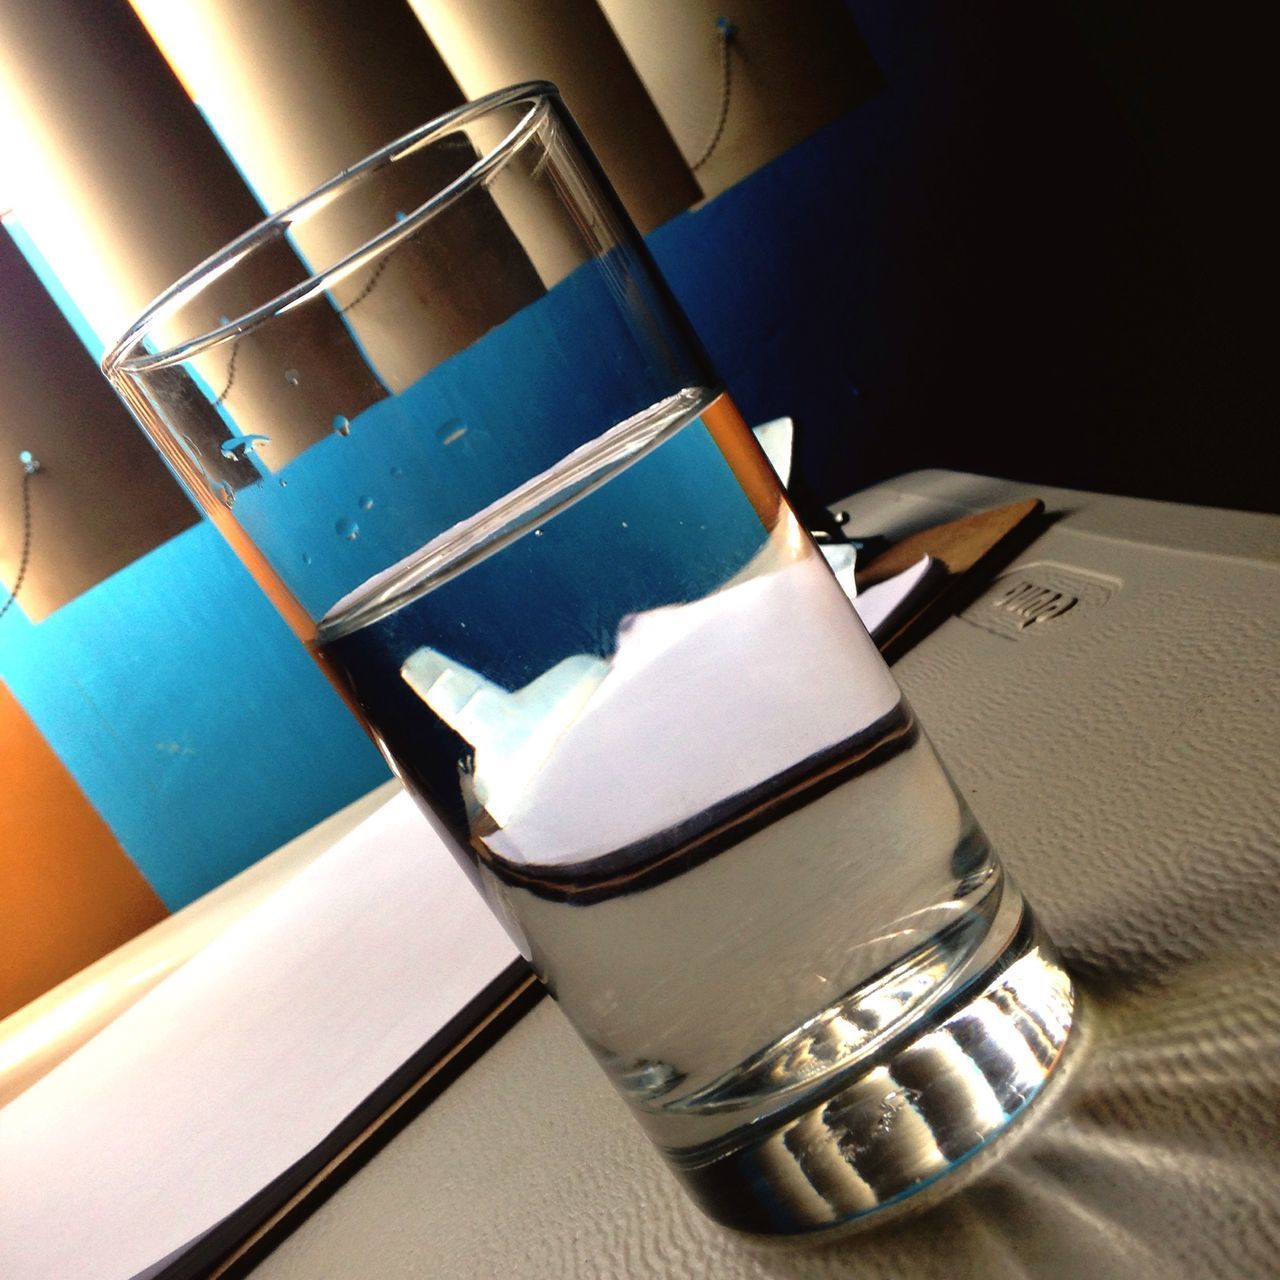 indoors, still life, close-up, table, no people, focus on foreground, absence, white color, metal, blue, empty, day, sunlight, high angle view, chair, drink, reflection, book, part of, single object